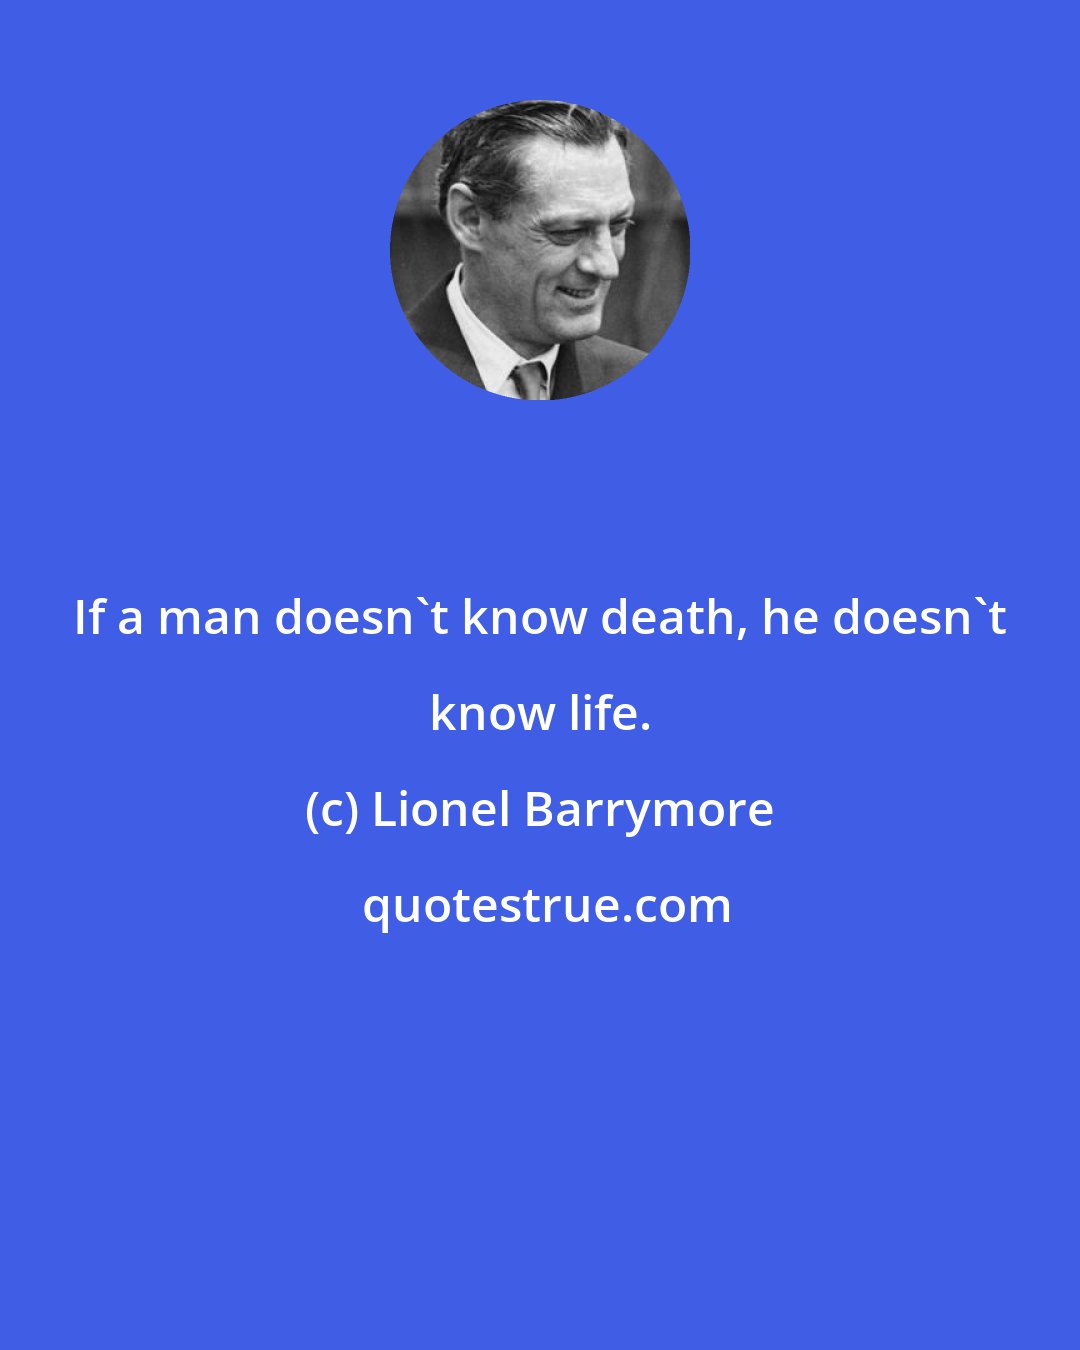 Lionel Barrymore: If a man doesn't know death, he doesn't know life.